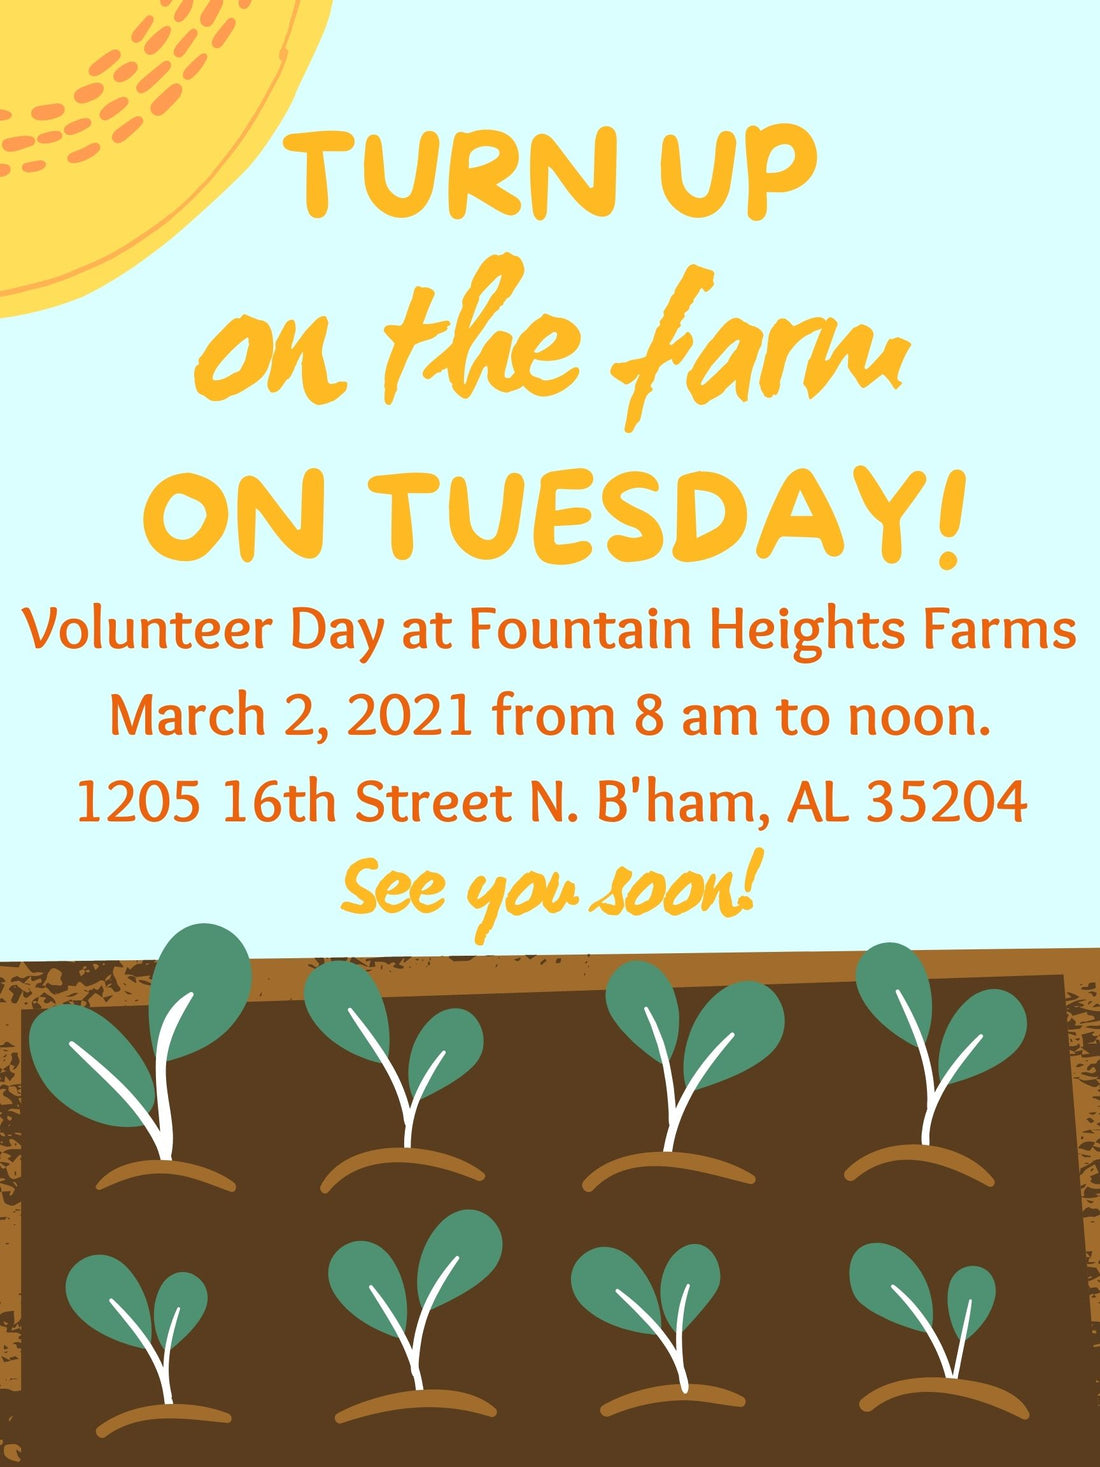 Tuesday, March 2 Volunteer day